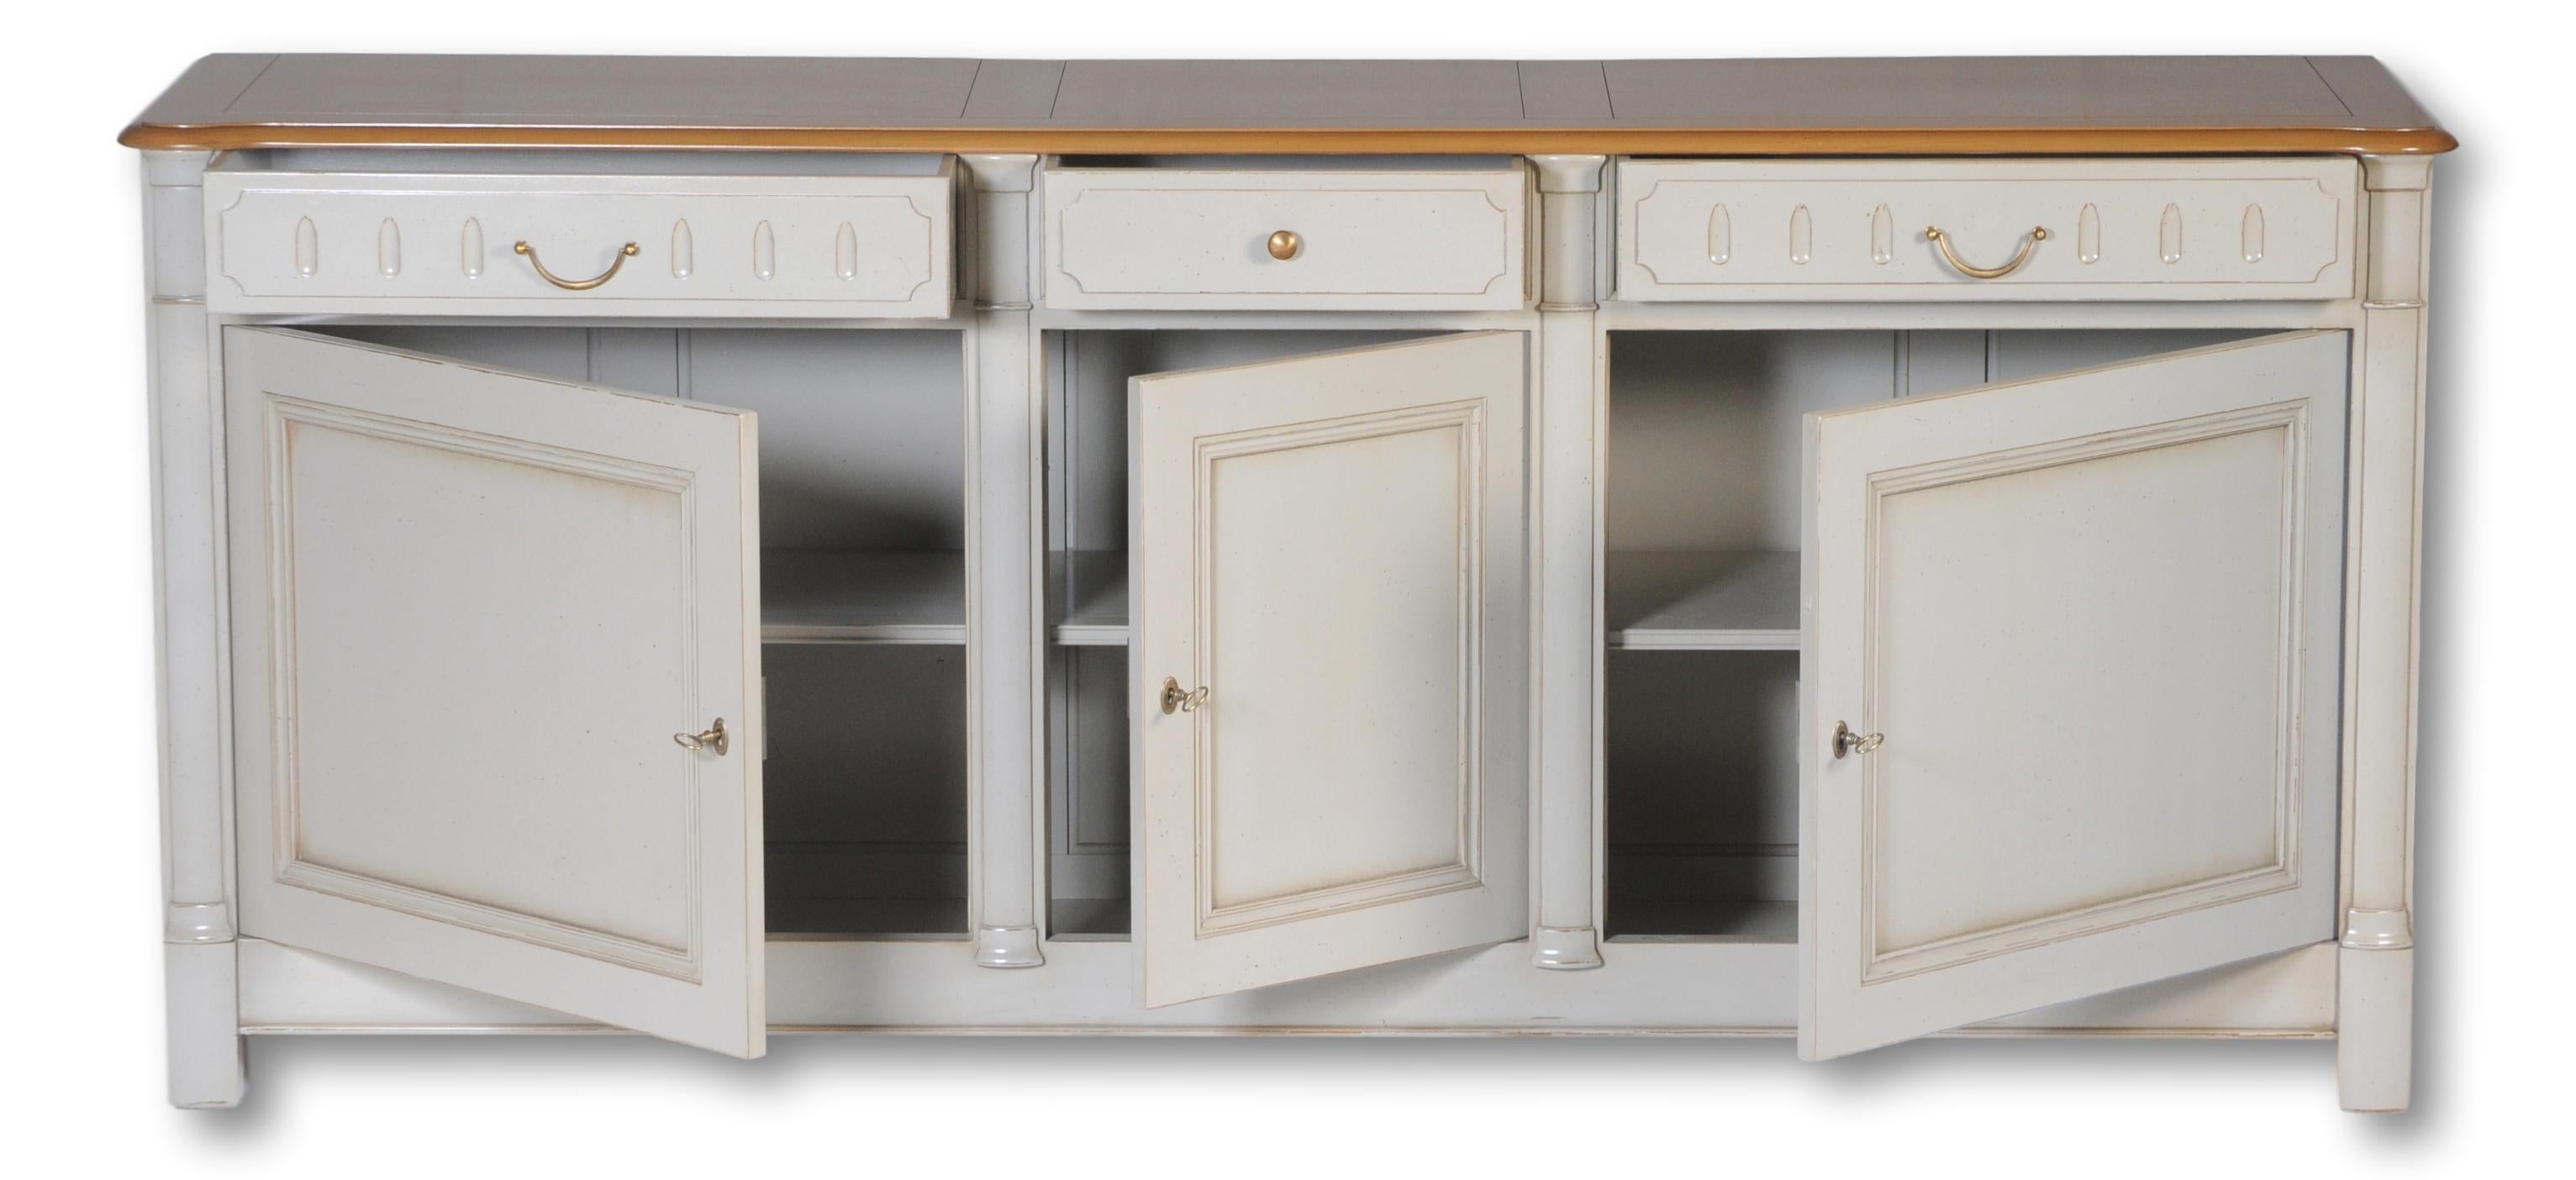 This Buffet is made out of French solid cherry wood . It features three drawers with dove mounted fronts, three doors and an inside cherry shelf. 

The top in cherry wood is stained. The rest of the structure lacquered in light grey gives this